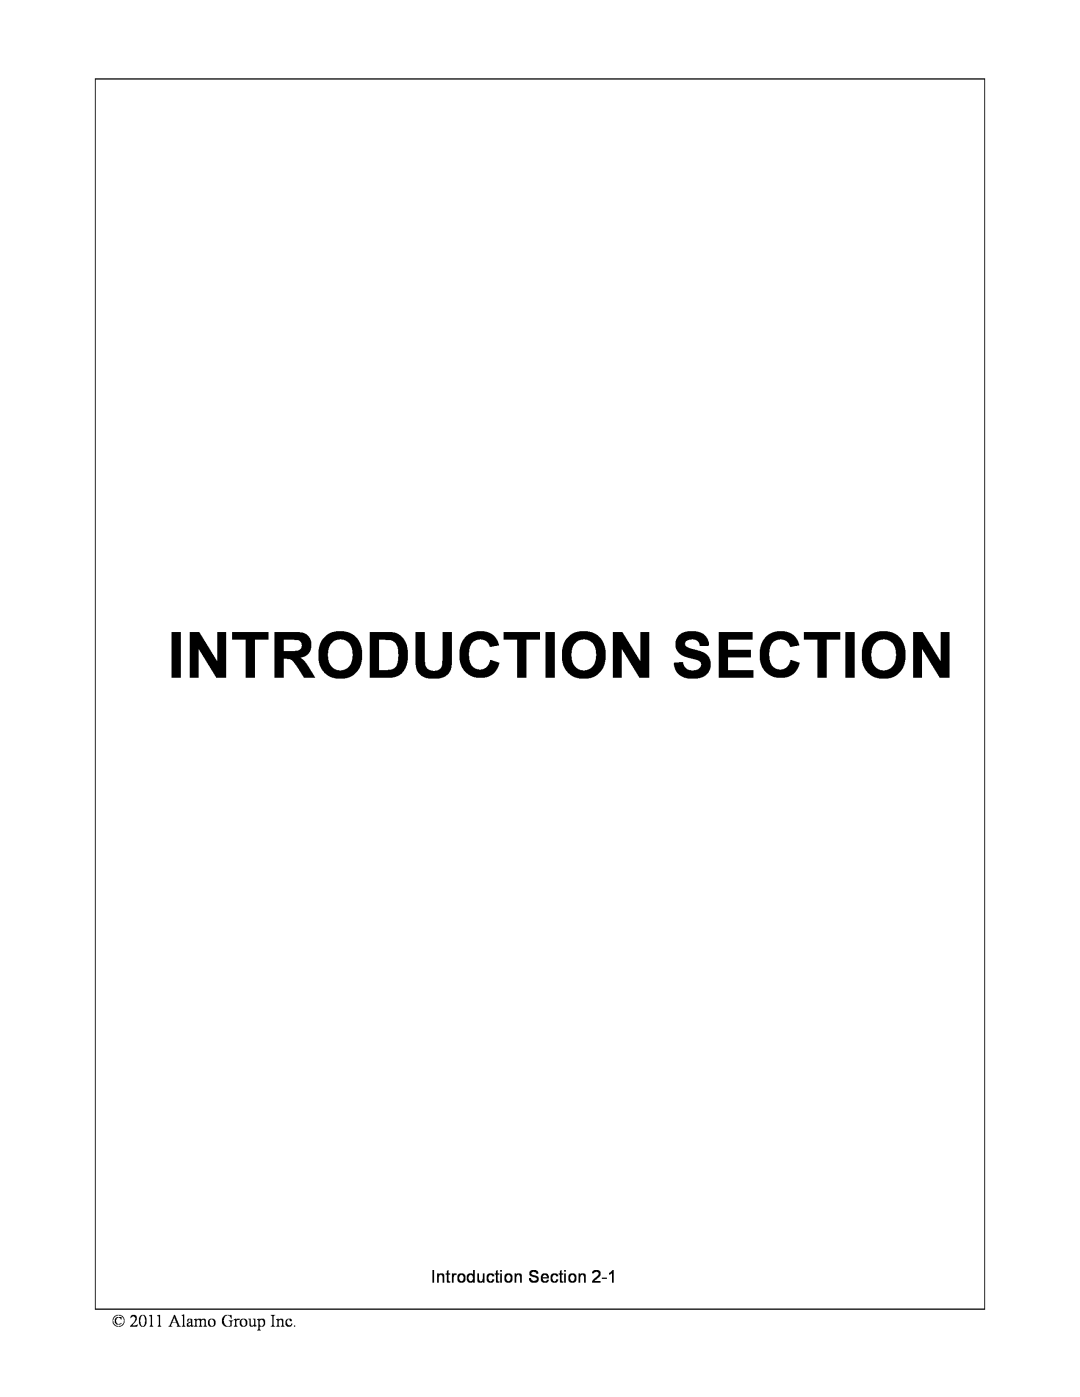 Servis-Rhino 2160 manual Introduction Section 